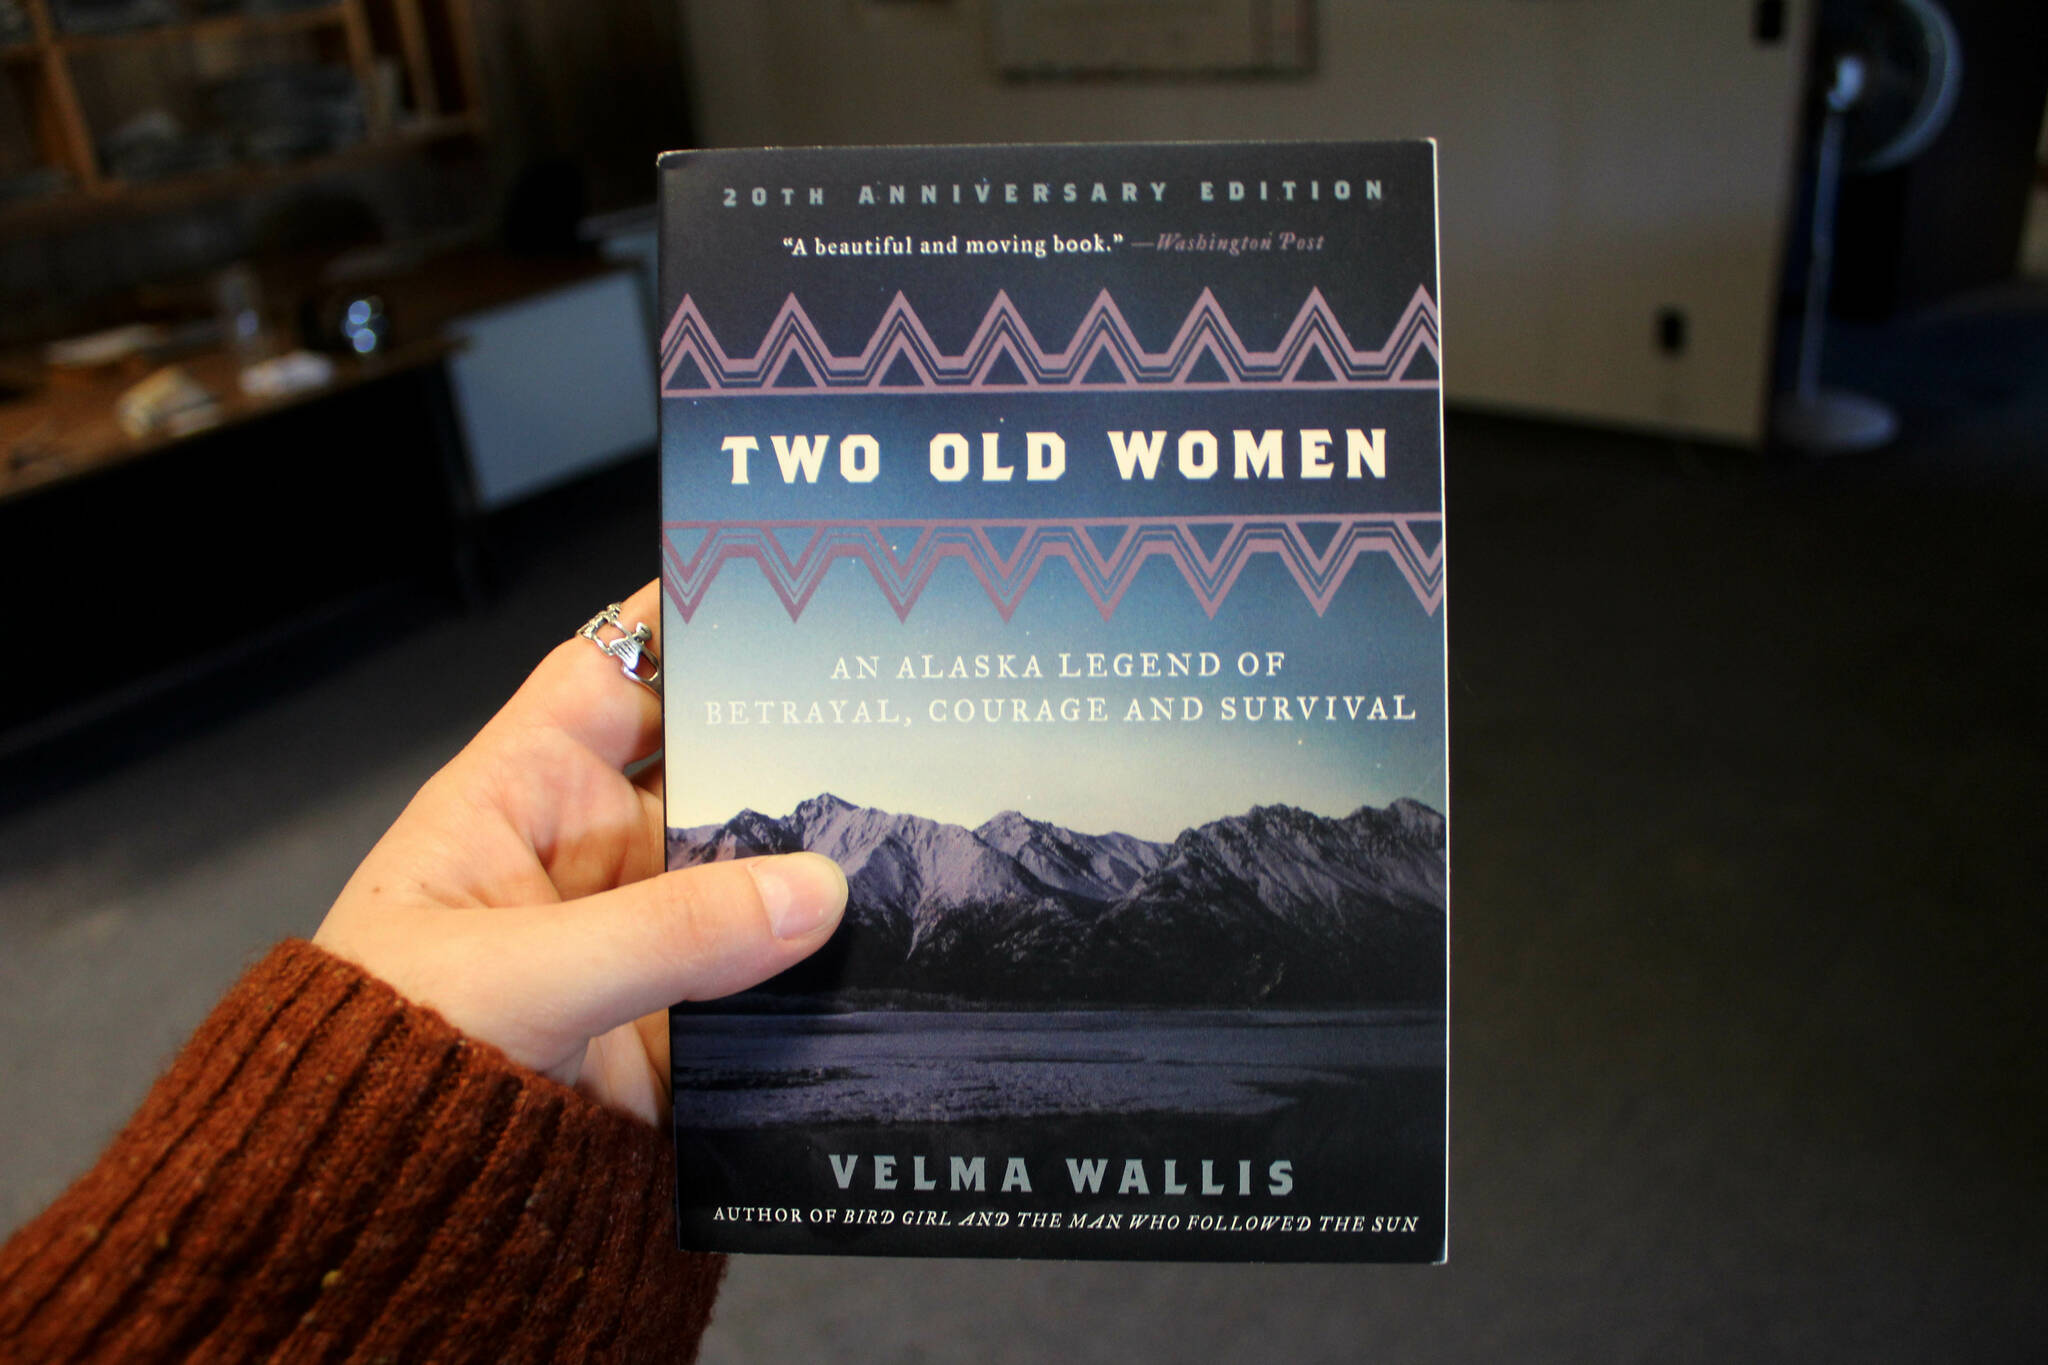 Ashlyn O’Hara/Peninsula Clarion
“Two Old Women,” published in 1992, is a traditional Athabascan legend as told by author Velma Wallis.